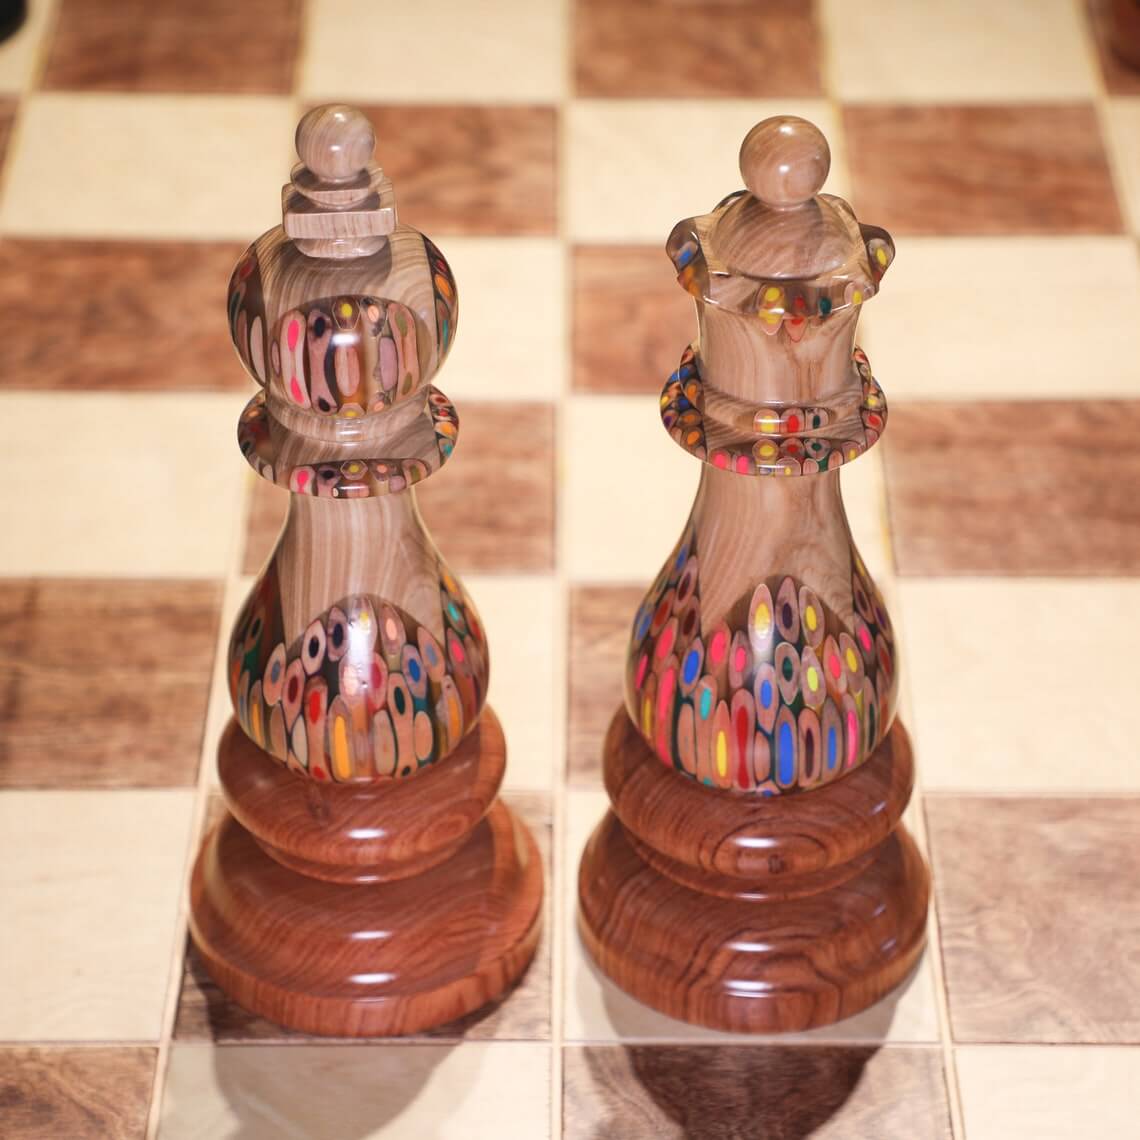 Giant Ornamental King and Queen - Chess Pieces Decor - Deluxe Serial